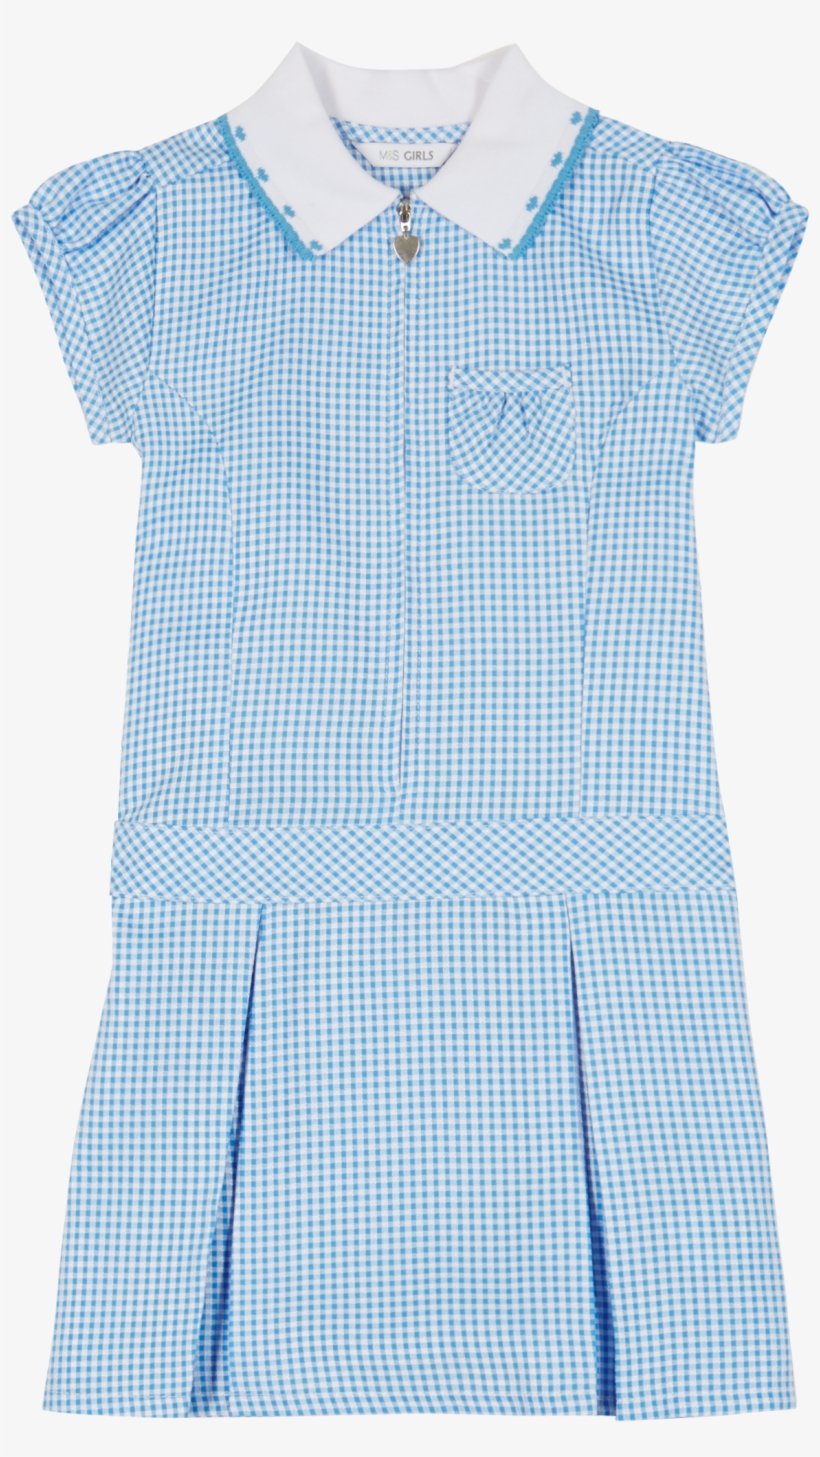 Blue Girls' Gingham Pleated Dress - Pattern, transparent png #8015125